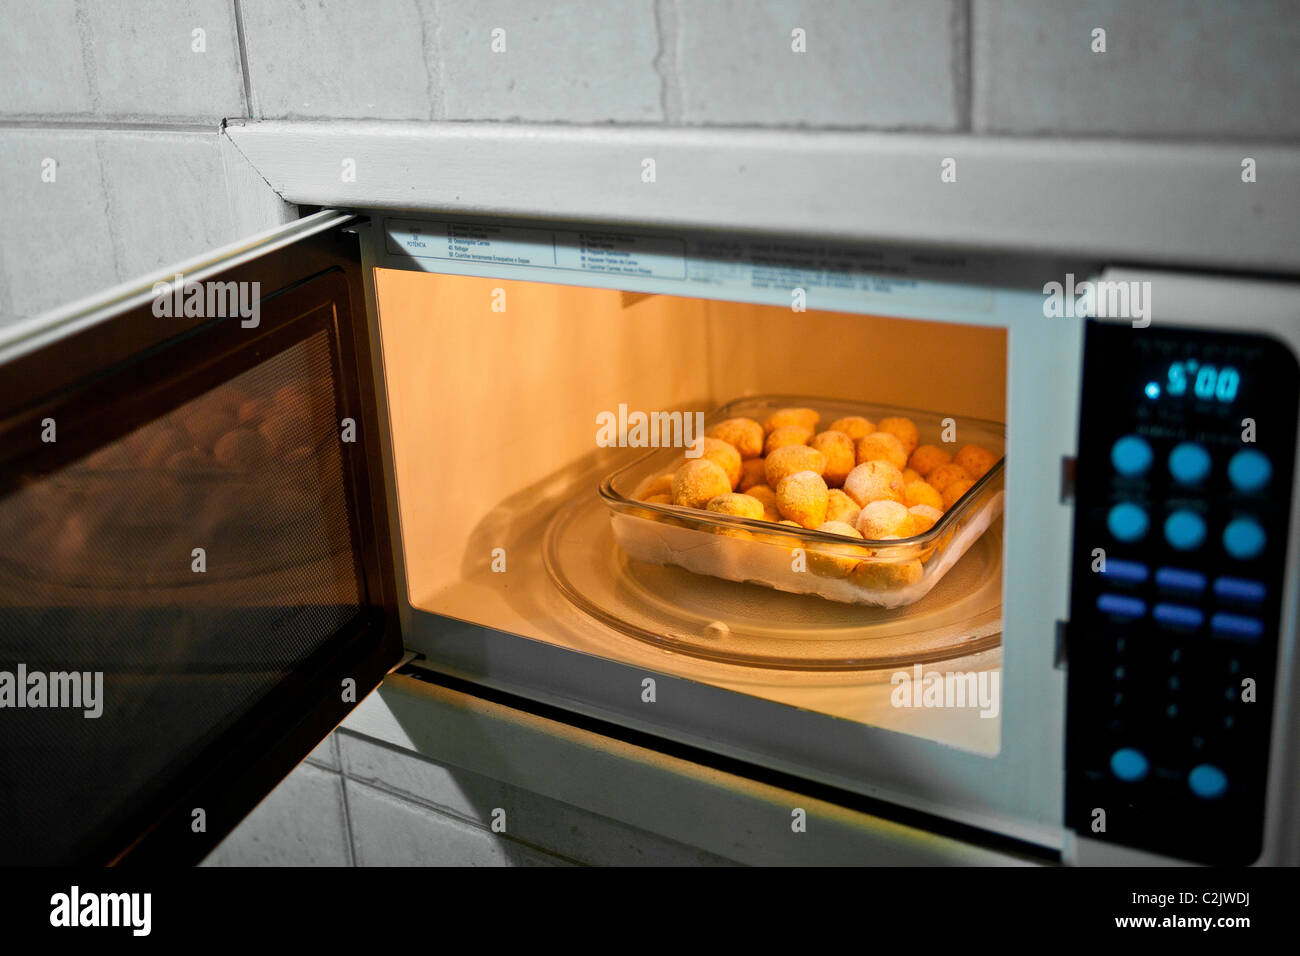 https://c8.alamy.com/comp/C2JWDJ/canapes-to-be-unfrozen-in-a-microwave-oven-C2JWDJ.jpg